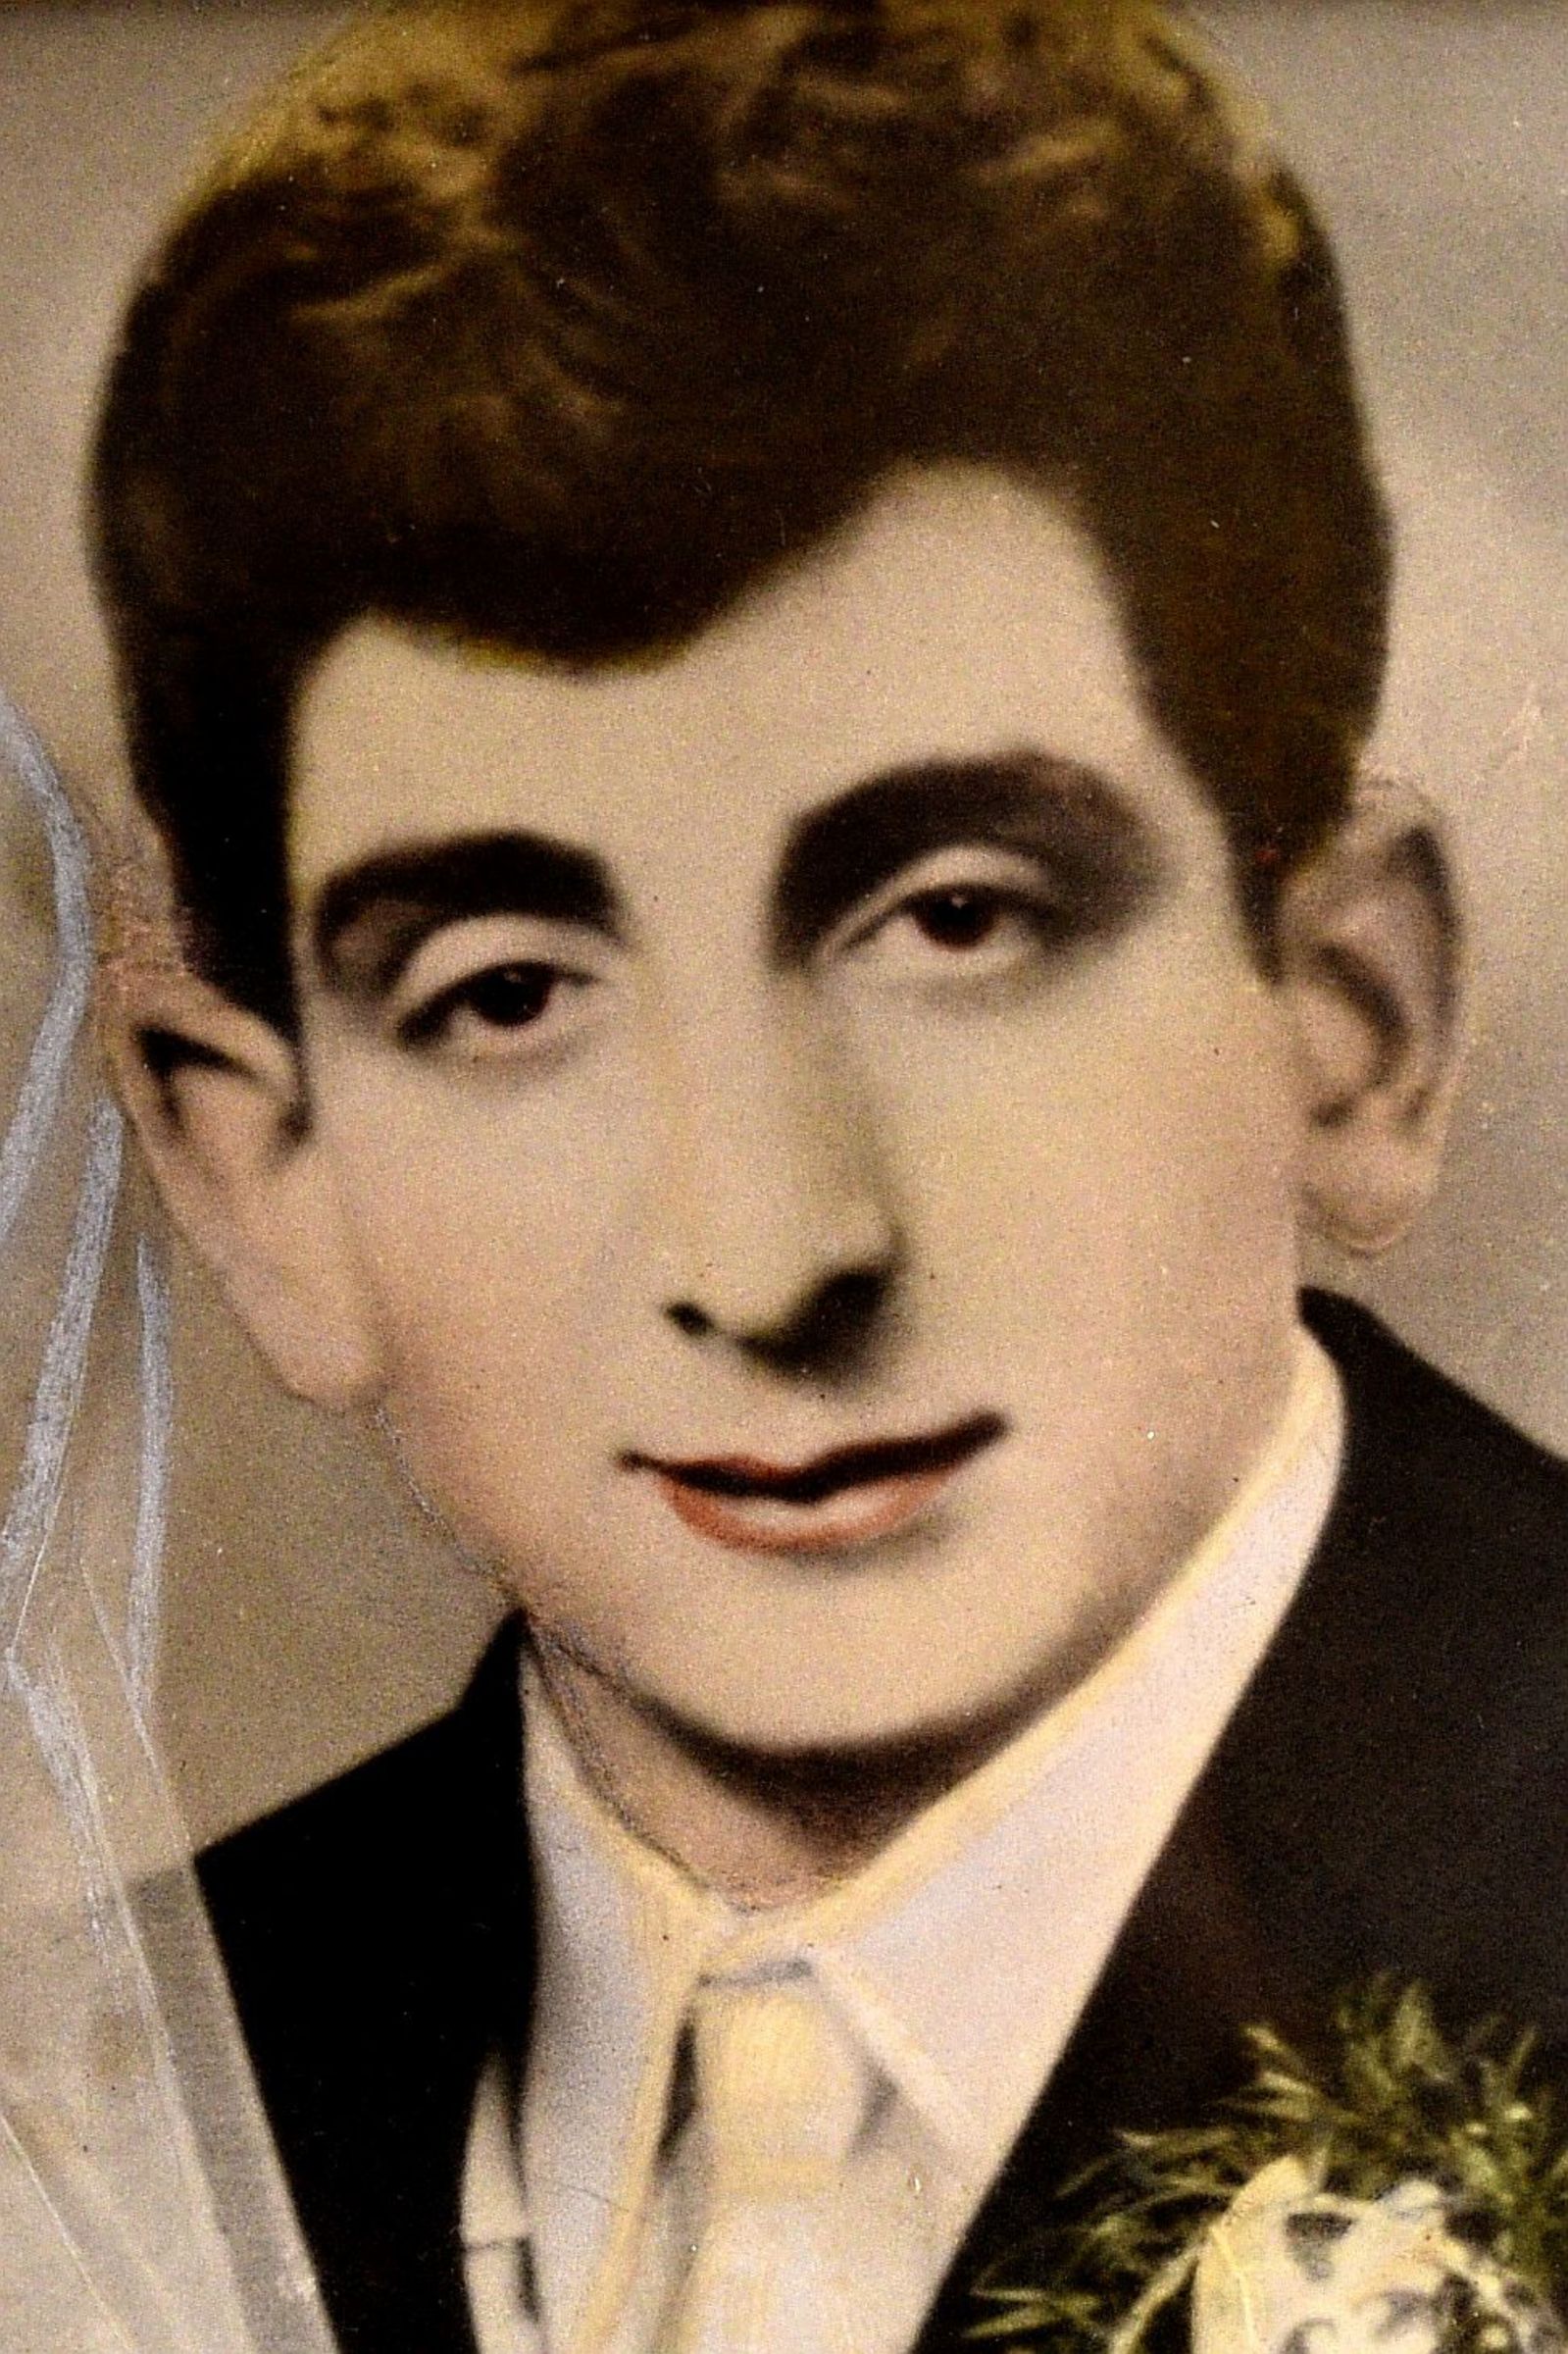 Koloman Mirga in 1965 / cut-out from his wedding photo